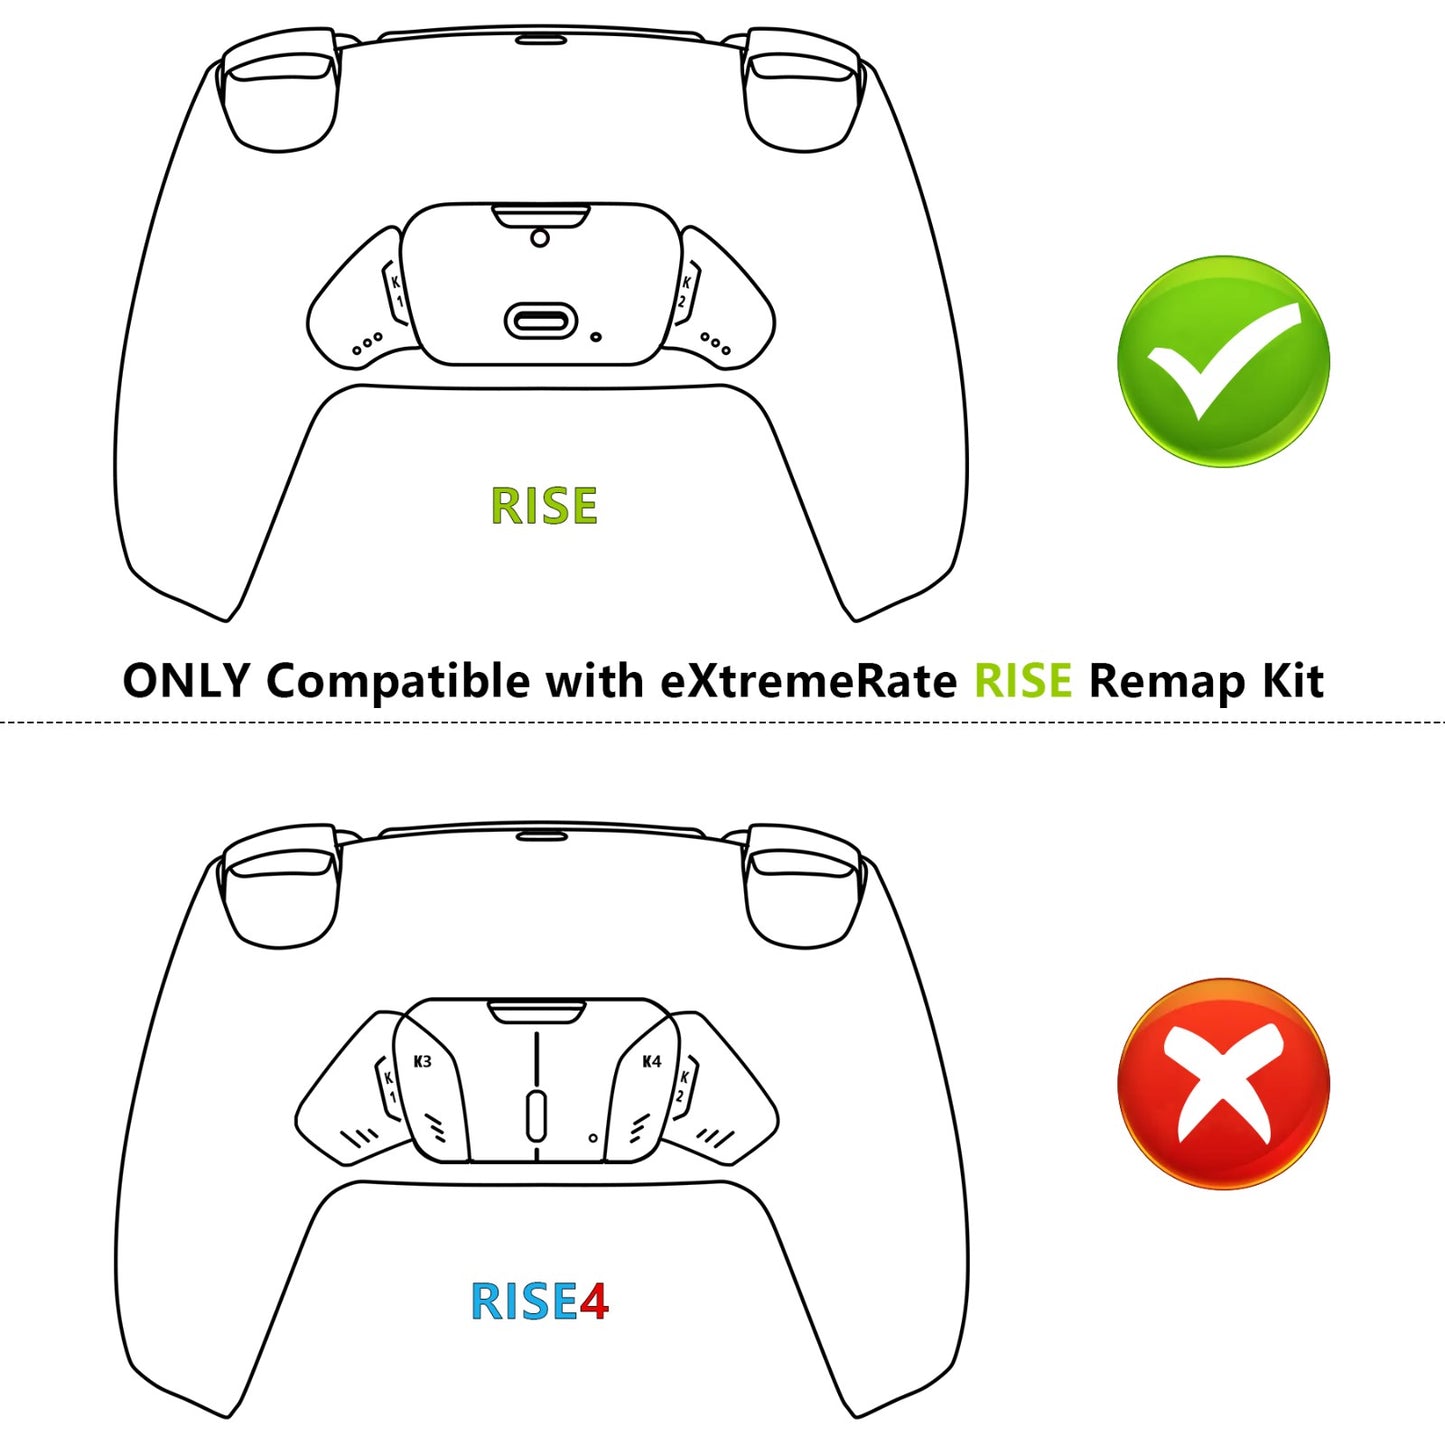 eXtremeRate Replacement Redesigned K1 K2 Back Buttons for eXtremerate RISE Remap Kit, Compatible with PS5 Controller - Sterling Silver eXtremeRate